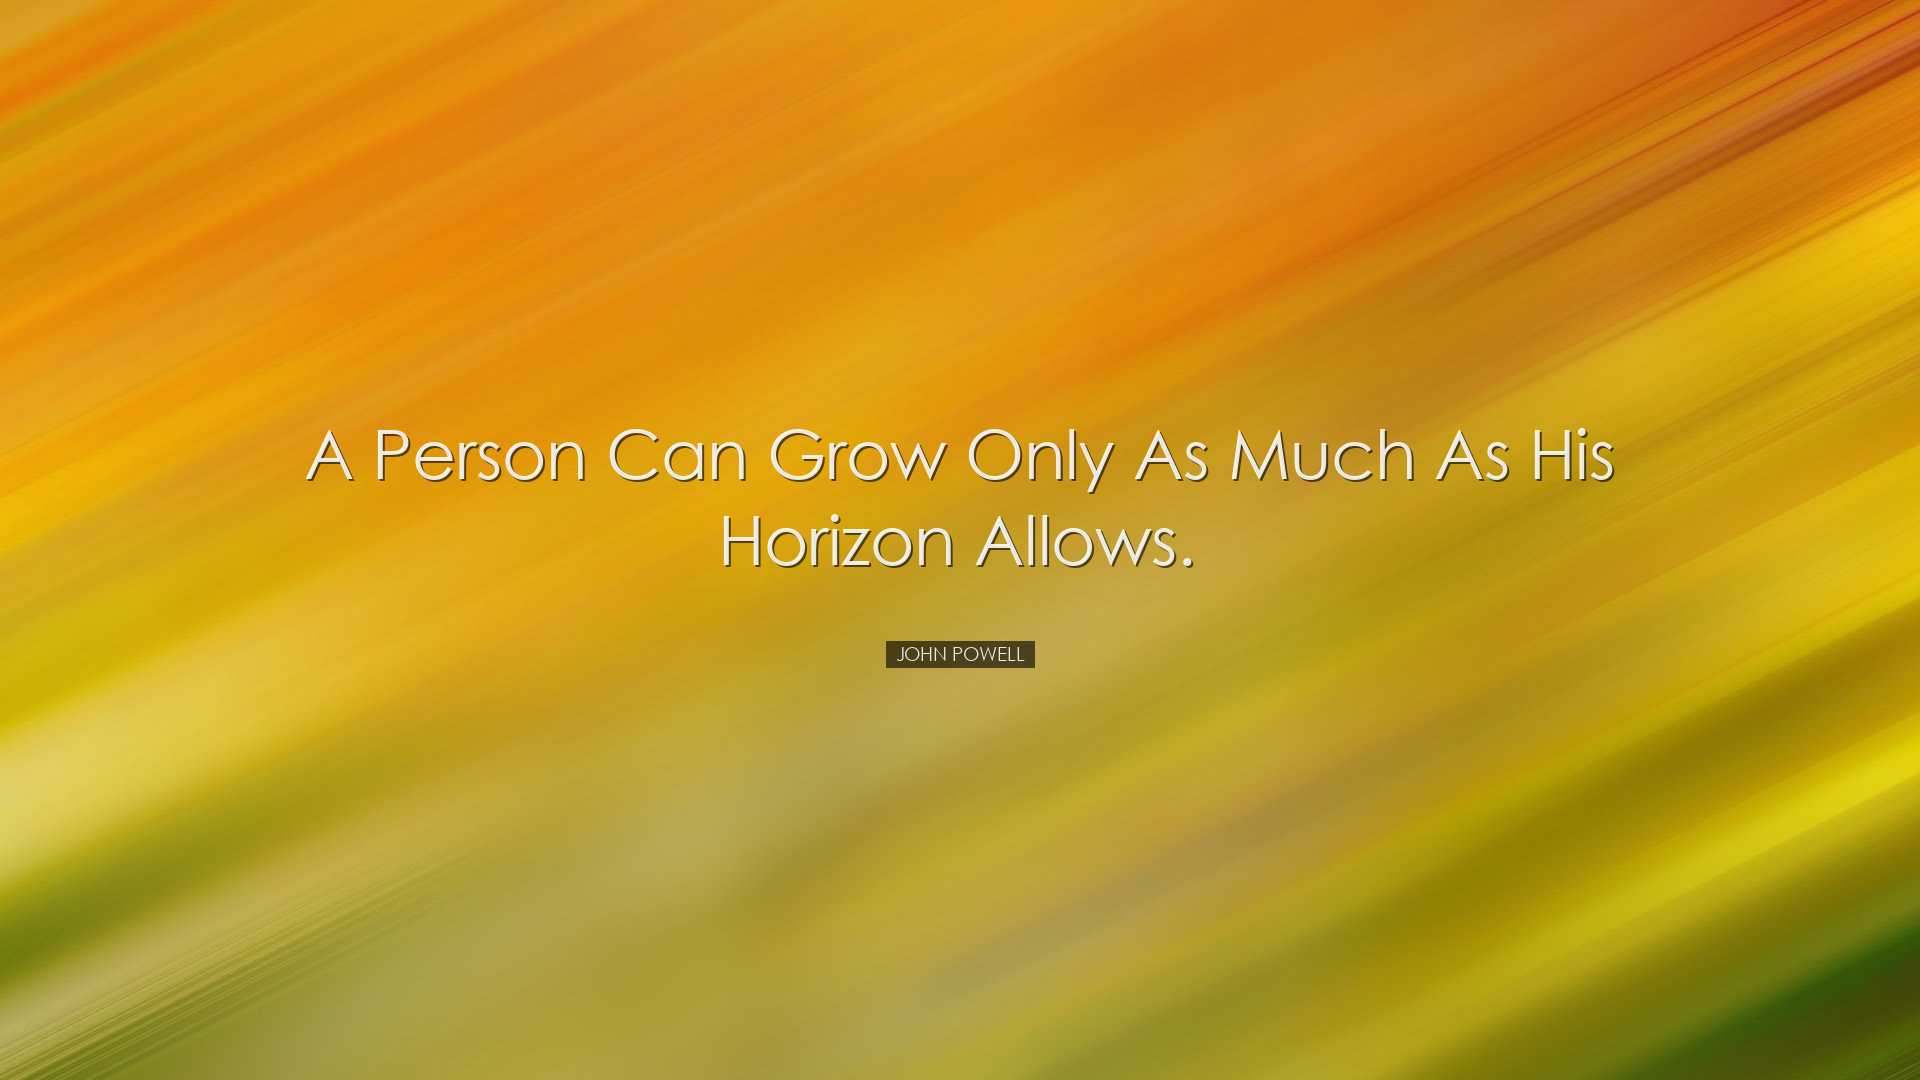 A person can grow only as much as his horizon allows. - John Powel